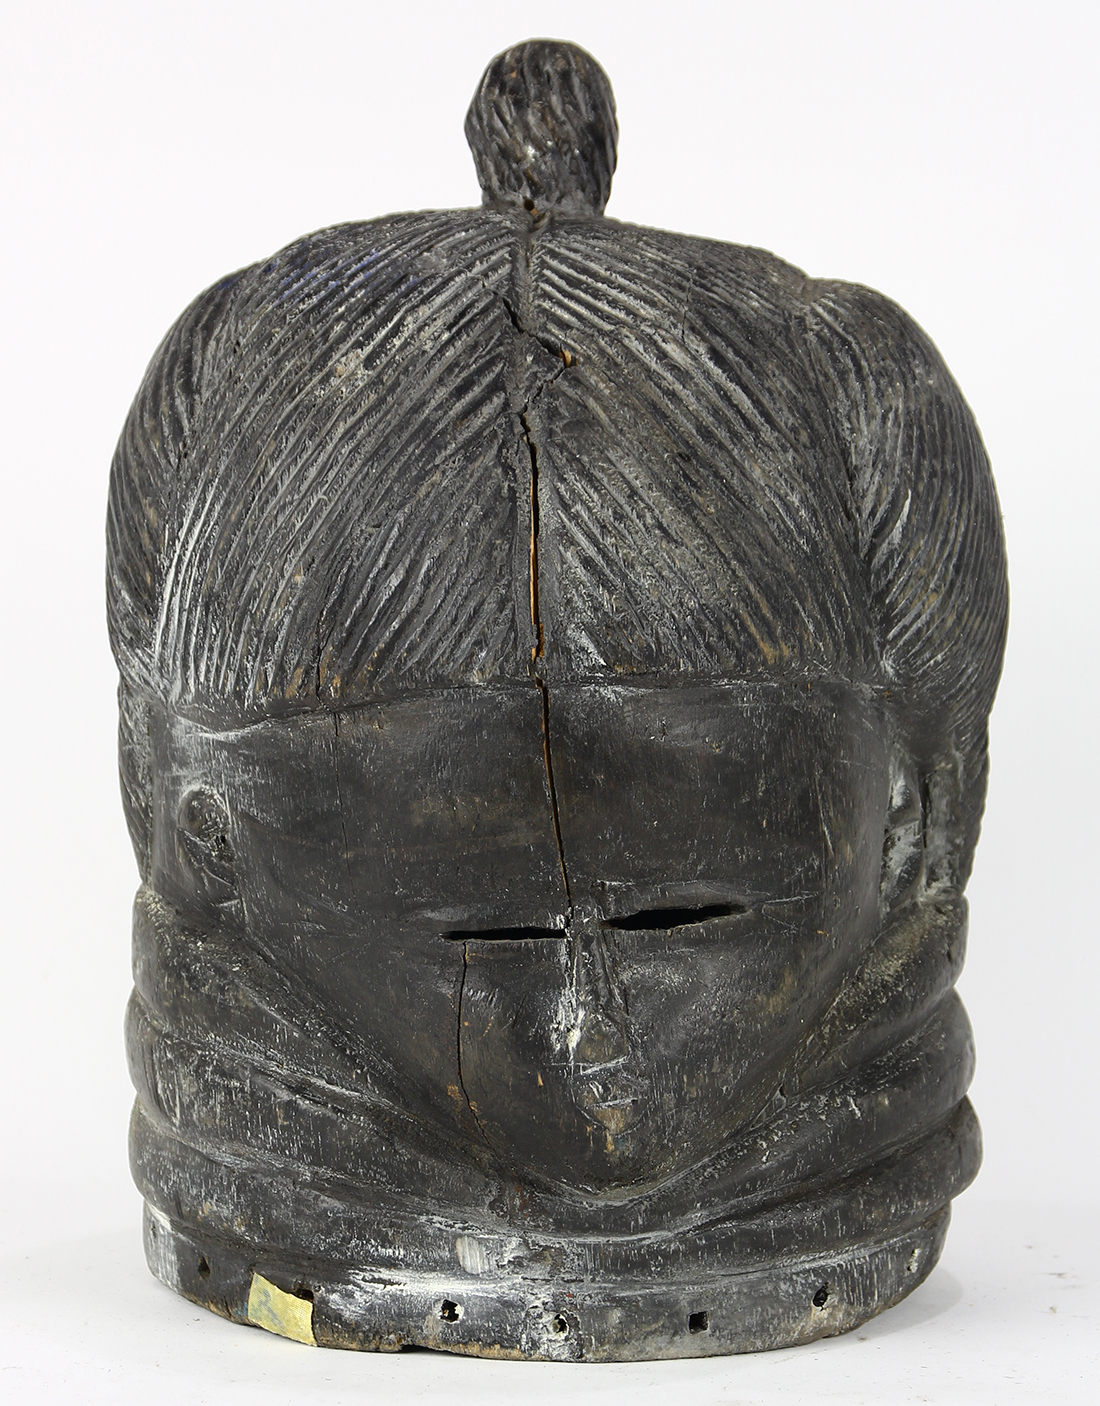 Mende people, Liberia and Sierra Leone, helmet mask, Janus with two faces, 14"h x 9.5"w - Image 2 of 3